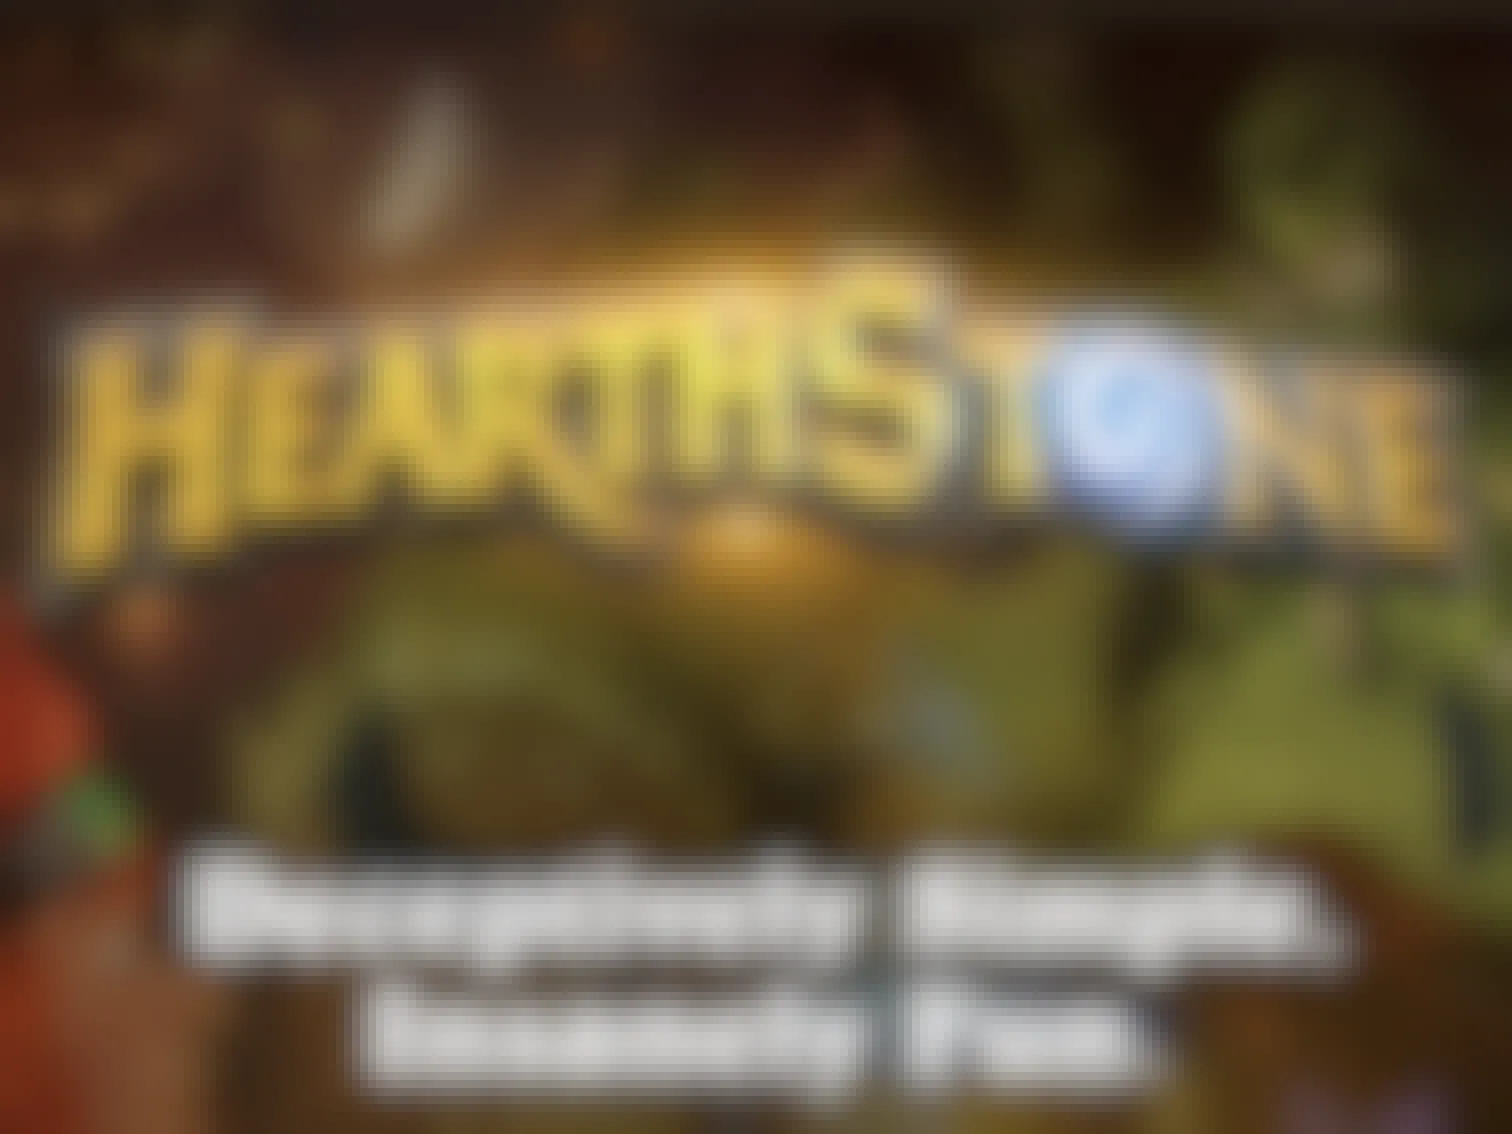 A screenshot of the banner and title from the Hearthstone website.